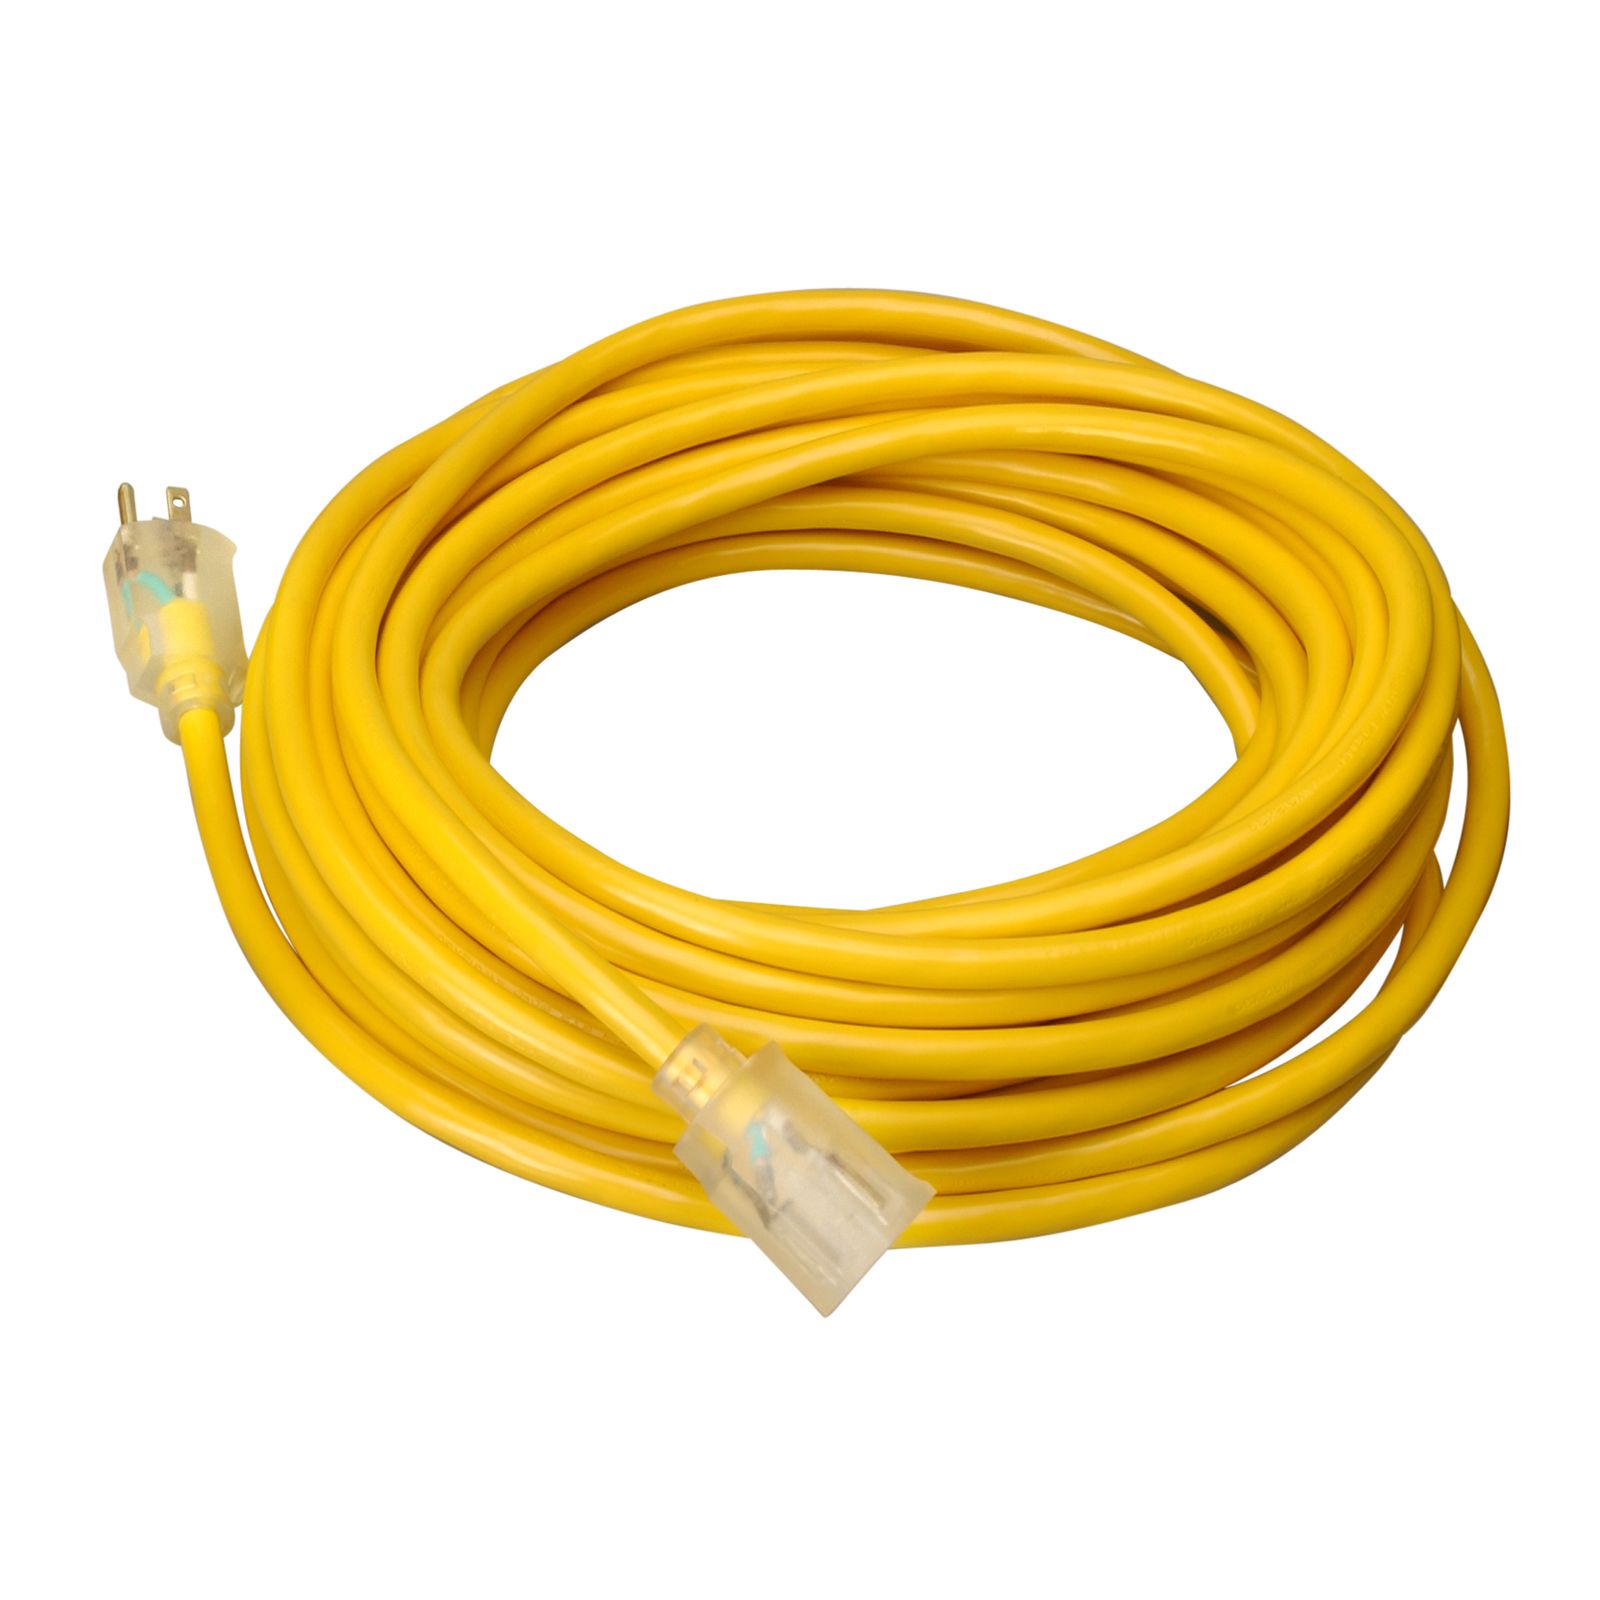 Coleman Cable 25 ft Extension Cord 12/3 Wire Yellow Jacket 